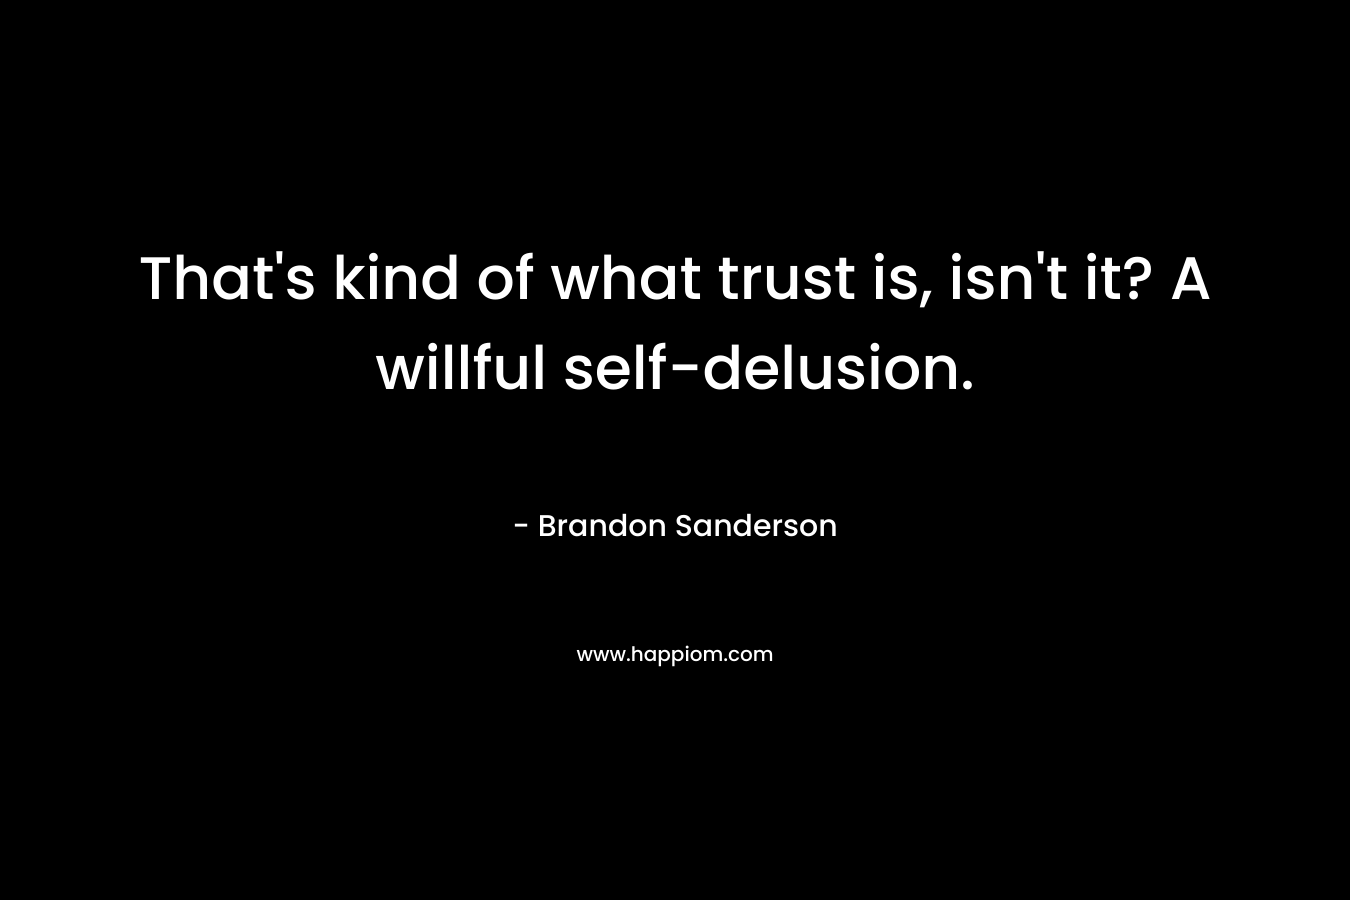 That’s kind of what trust is, isn’t it? A willful self-delusion. – Brandon Sanderson